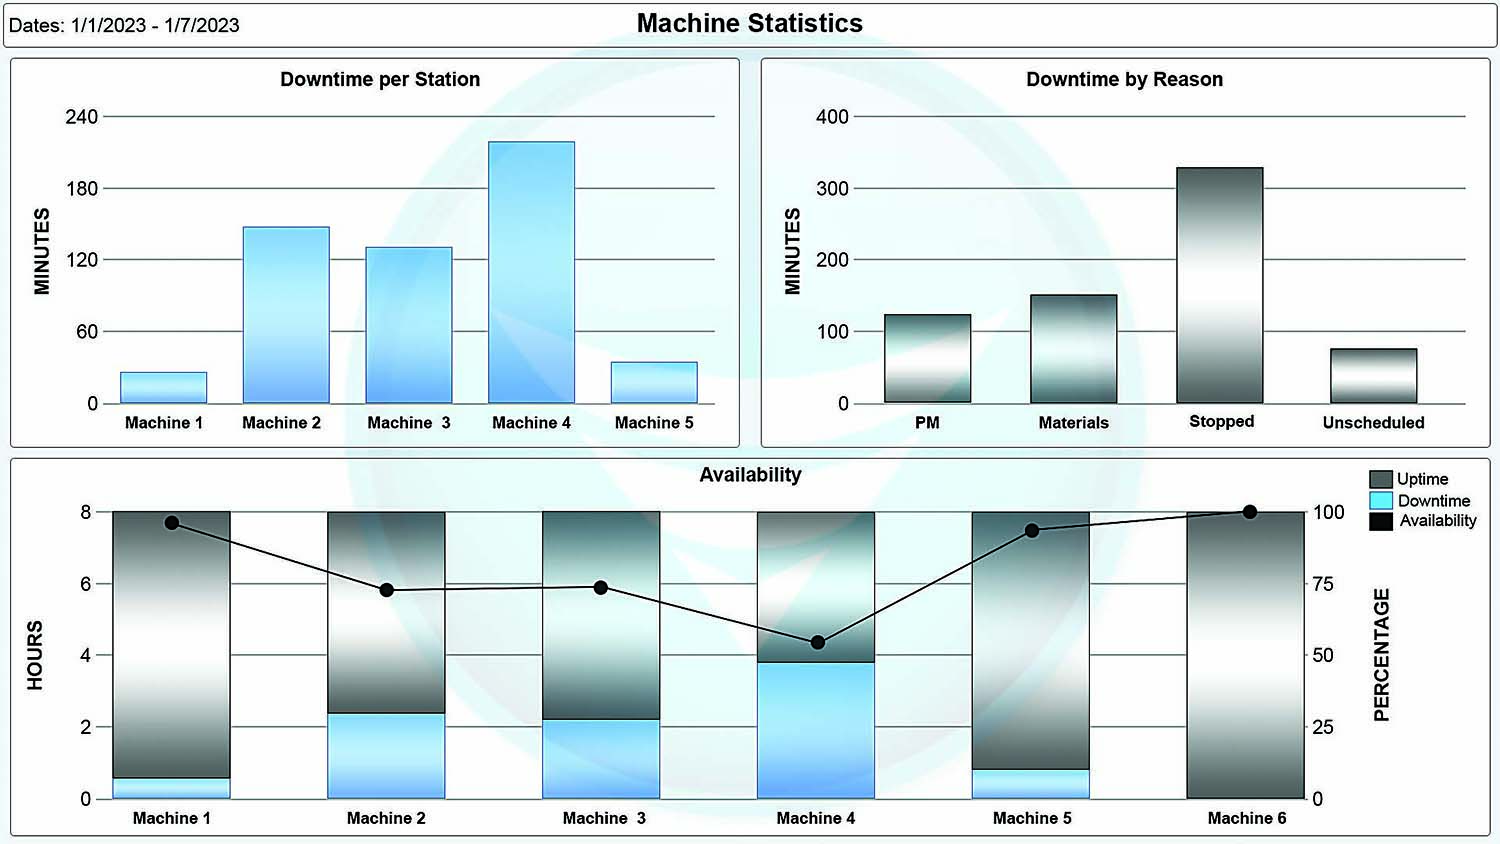 The VersaVision machine monitoring system displays various machine statistics, including downtime per station, downtime by reason and machine availability.